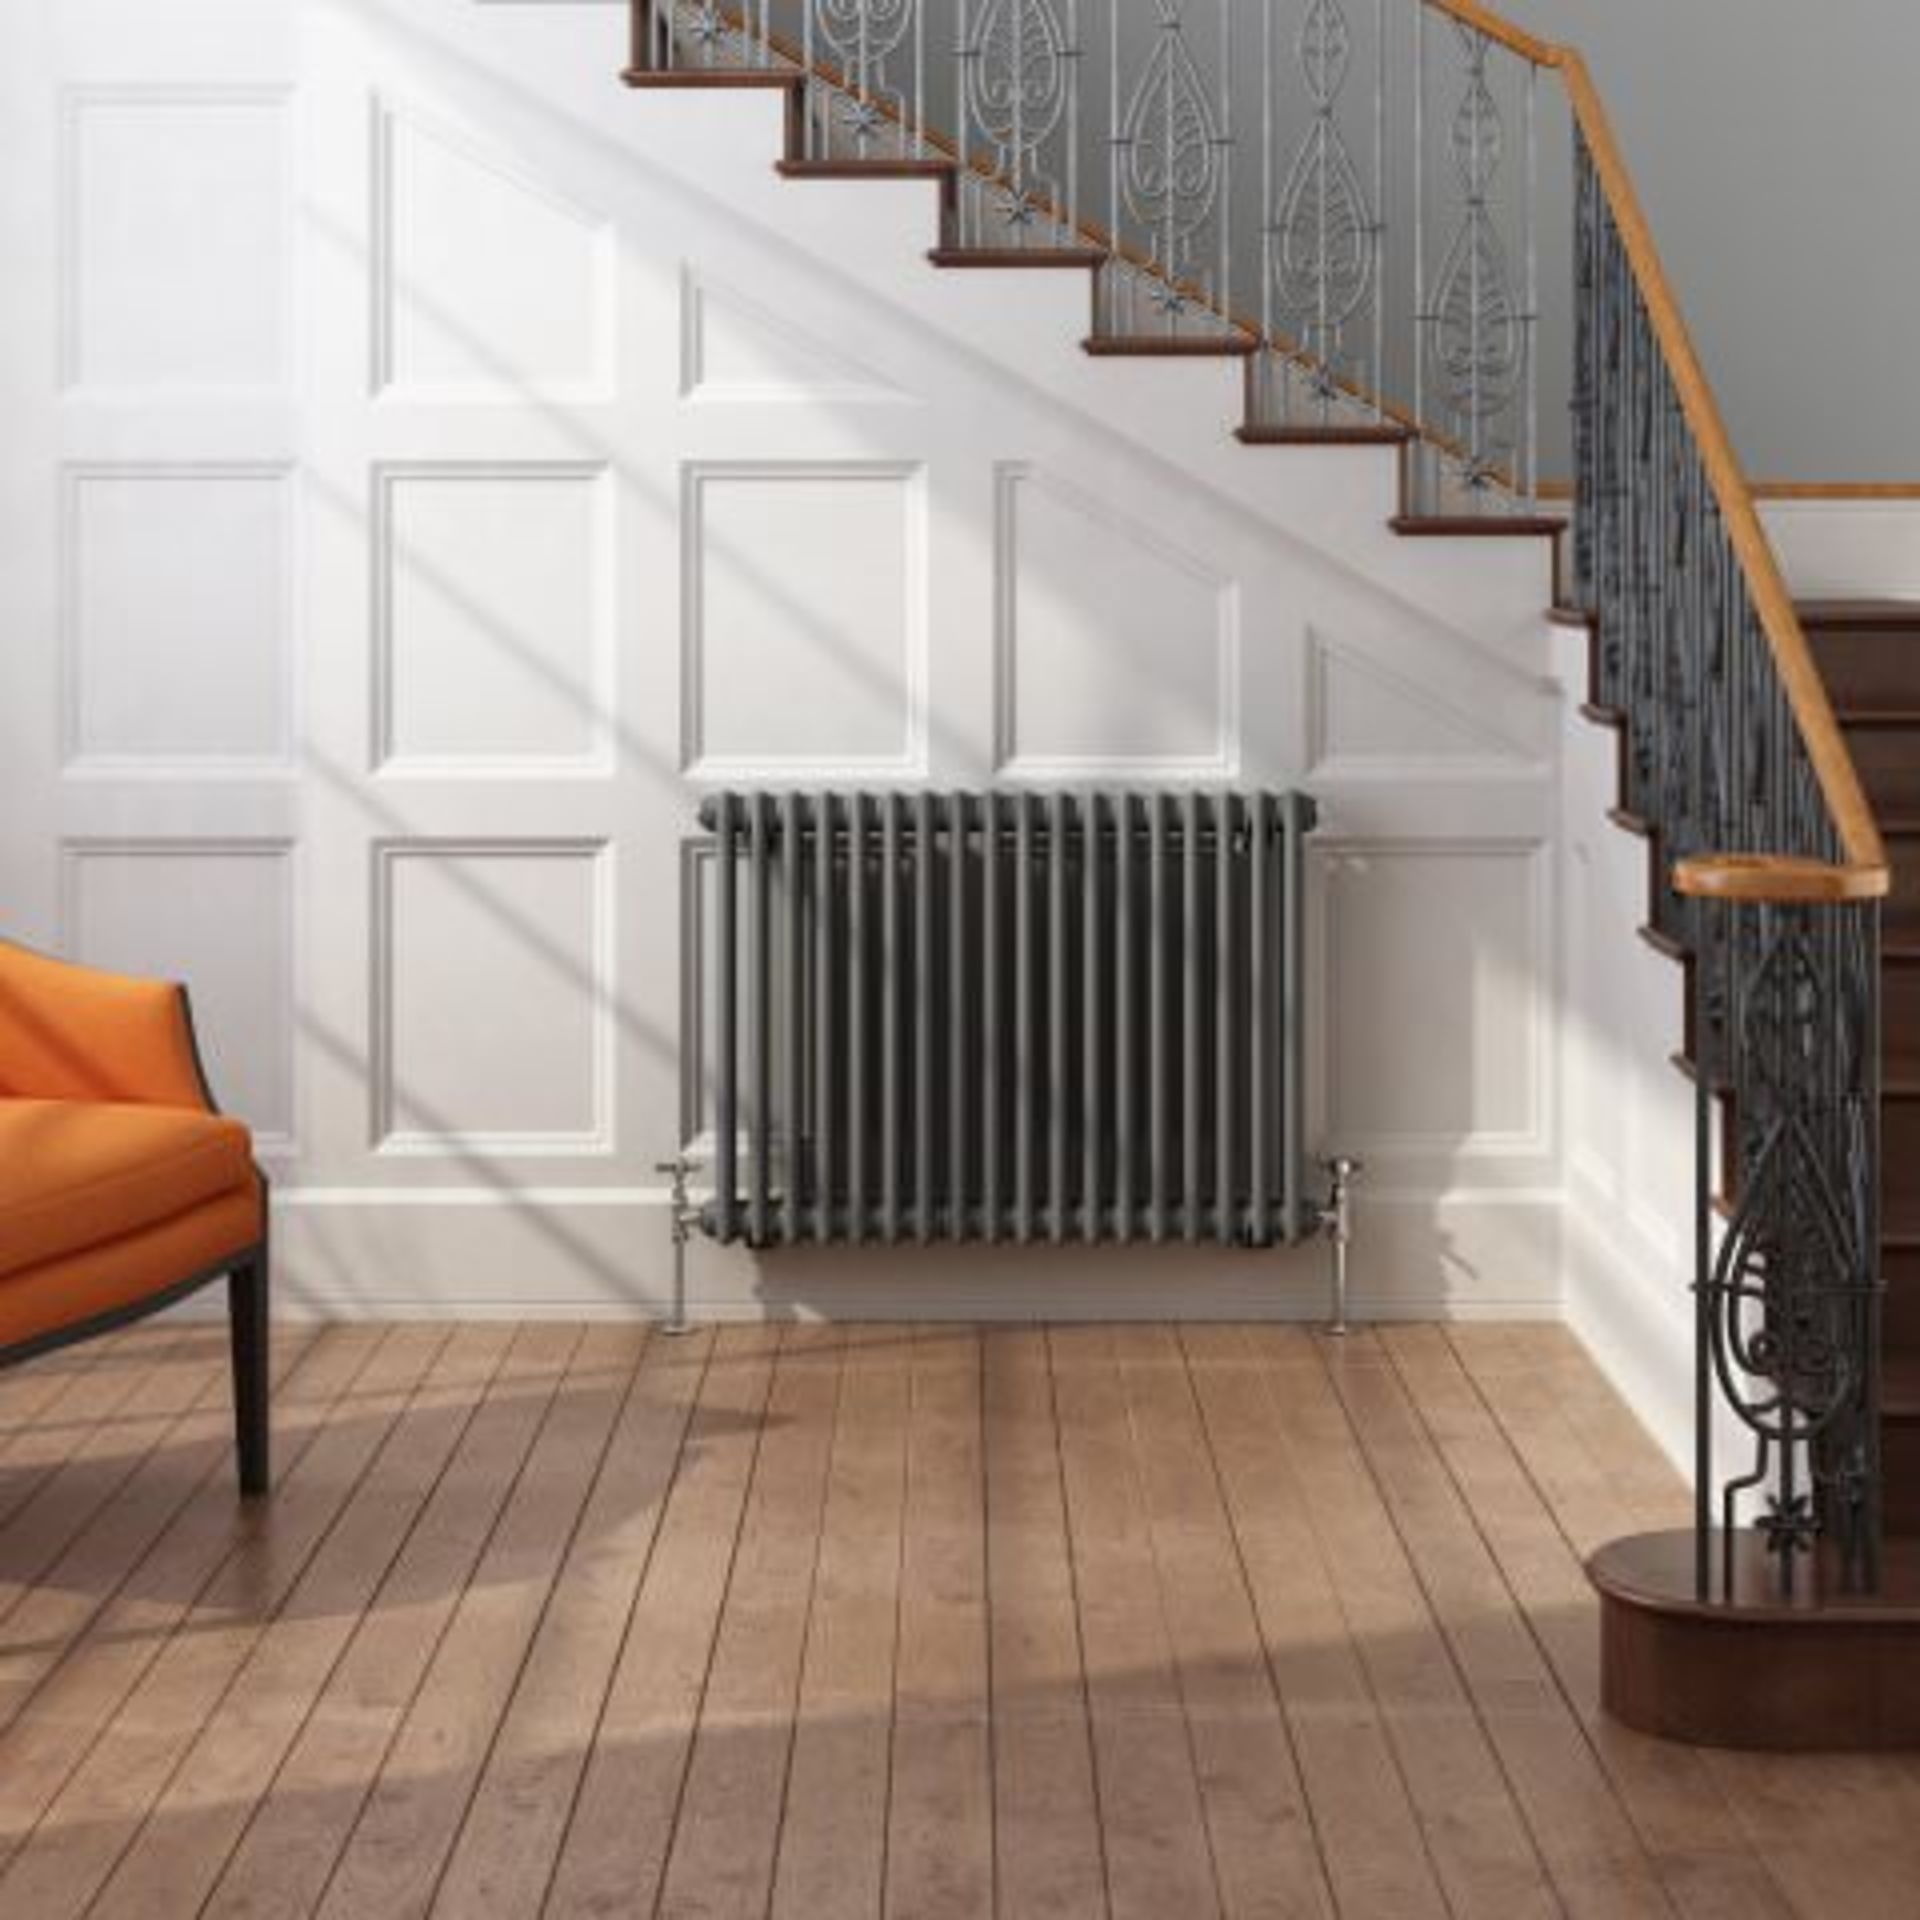 (I101) 600x828mm Anthracite Double Panel Horizontal Colosseum Traditional Radiator RRP £447.89 - Image 2 of 3